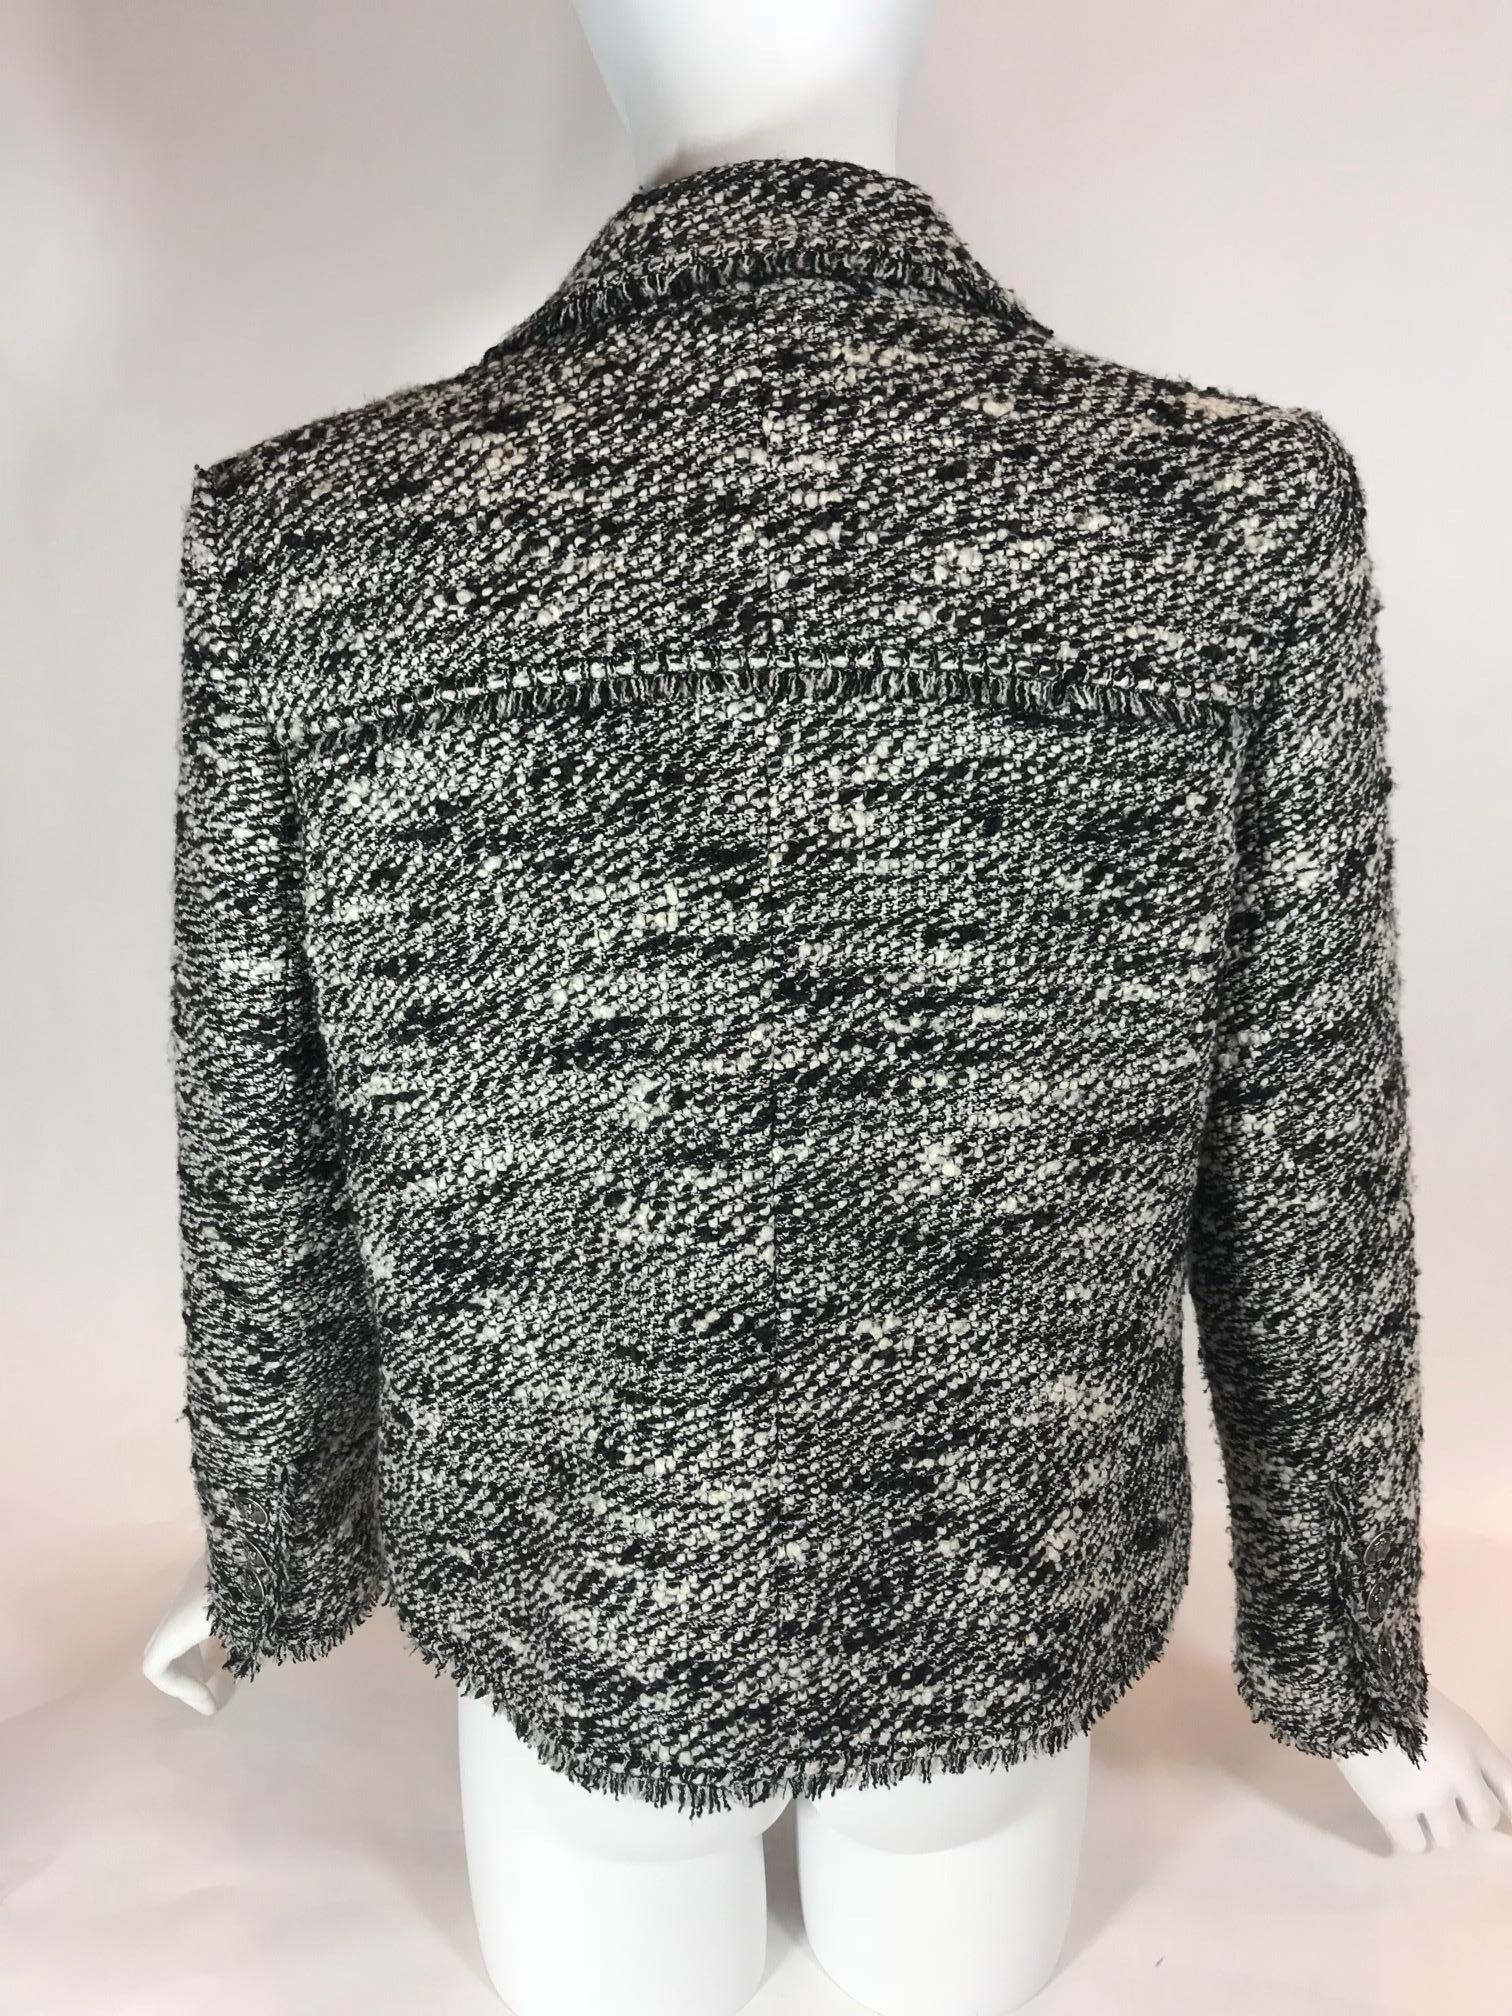 Women's or Men's Chanel Tweed Button Up Jacket